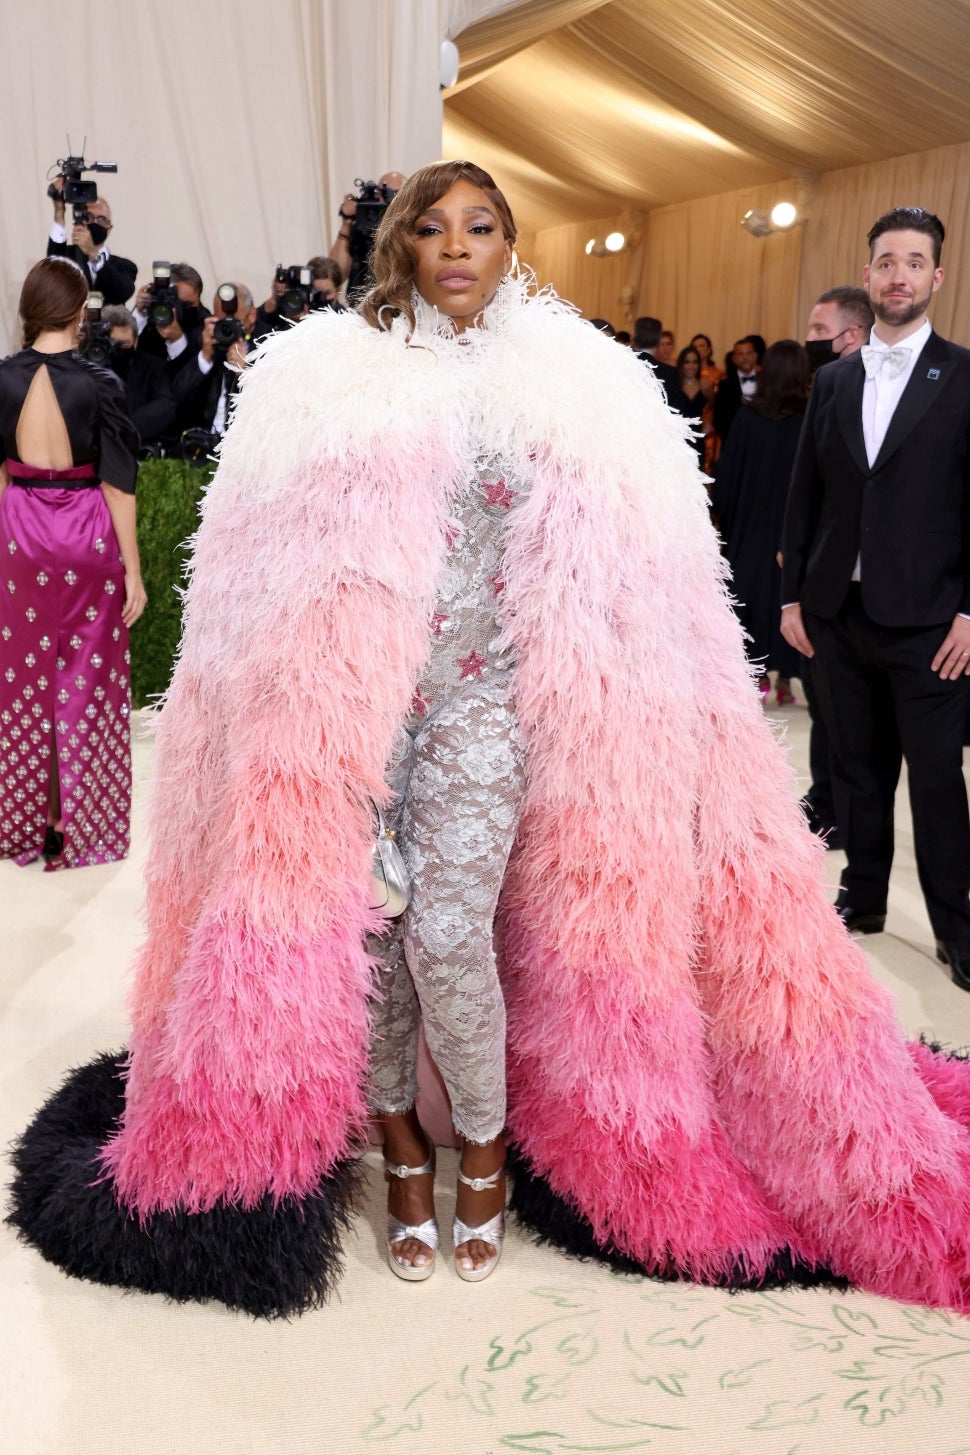  Serena Williams attends The 2021 Met Gala Celebrating In America: A Lexicon Of Fashion at Metropolitan Museum of Art on September 13, 2021 in New York City. 